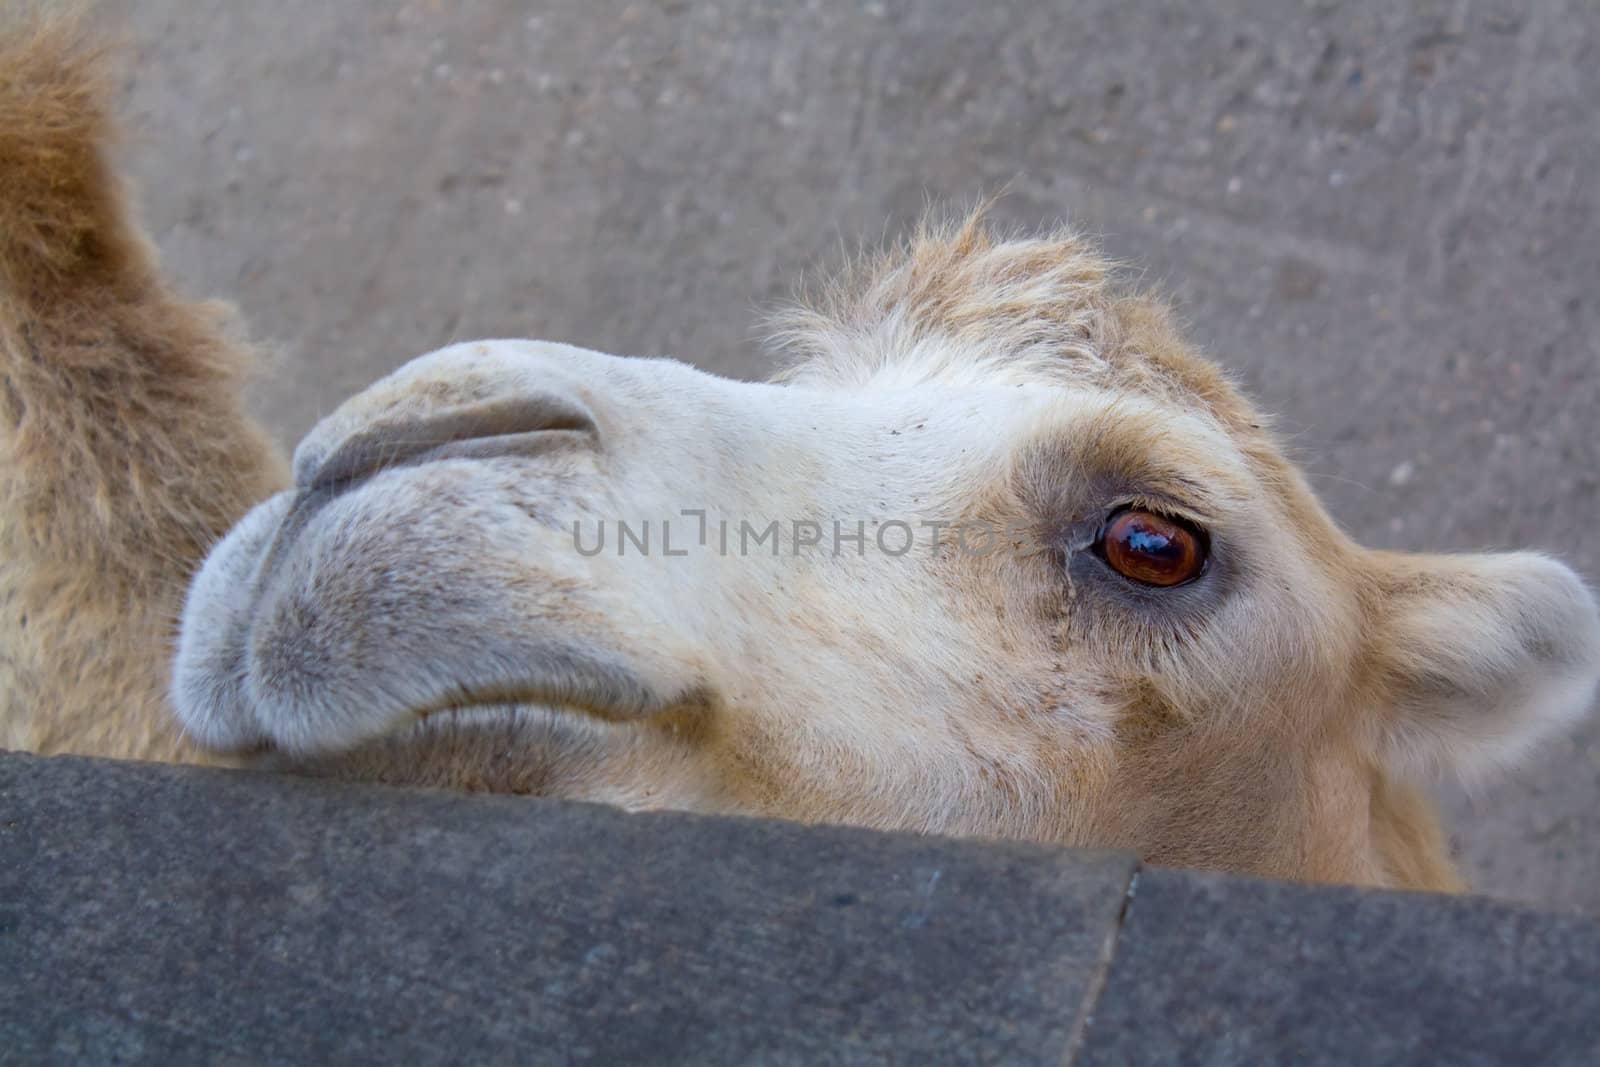 Camel with sad eyes. It is photographed by close up.